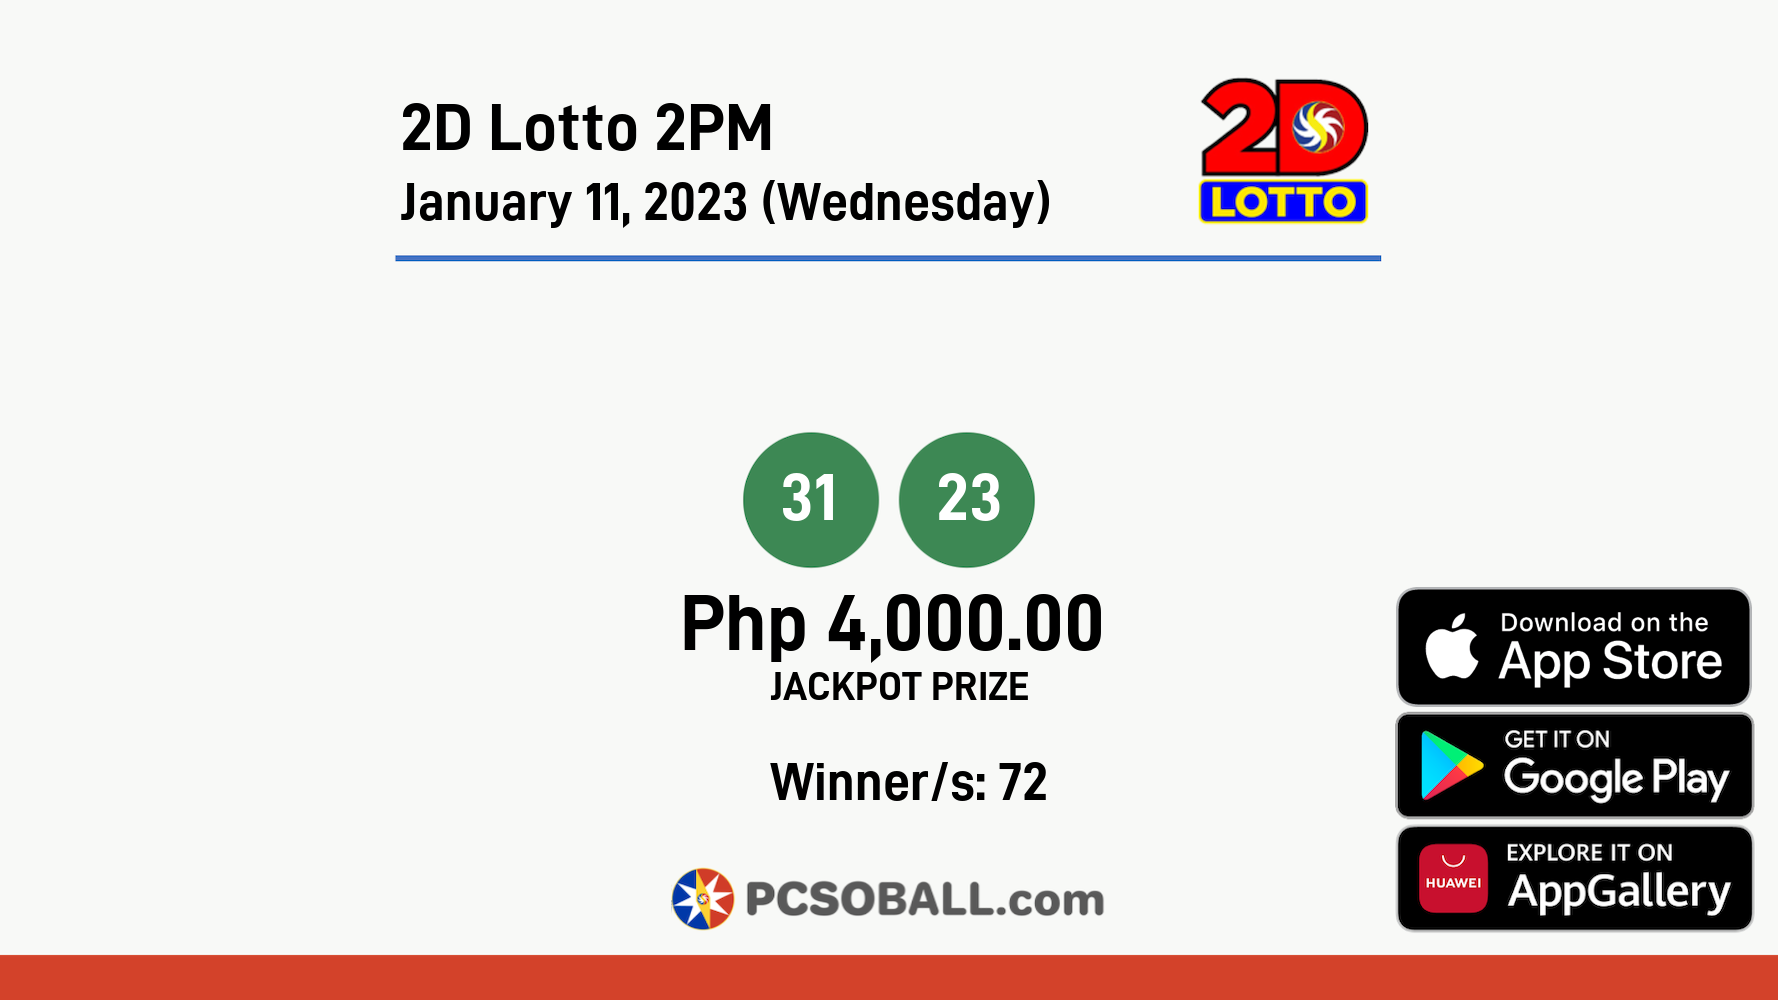 2D Lotto 2PM January 11, 2023 (Wednesday) Result